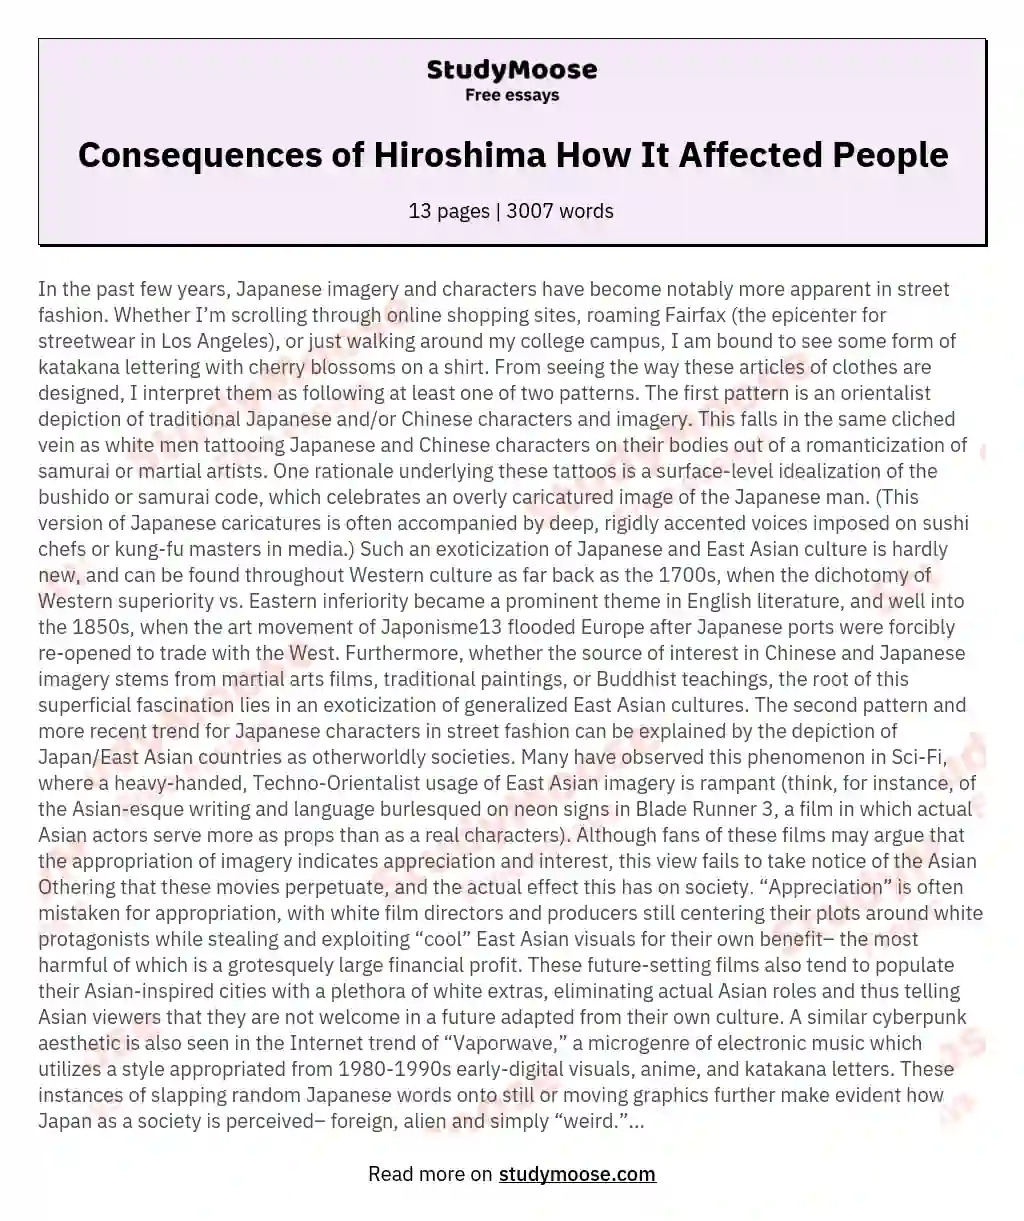 Consequences of Hiroshima How It Affected People essay